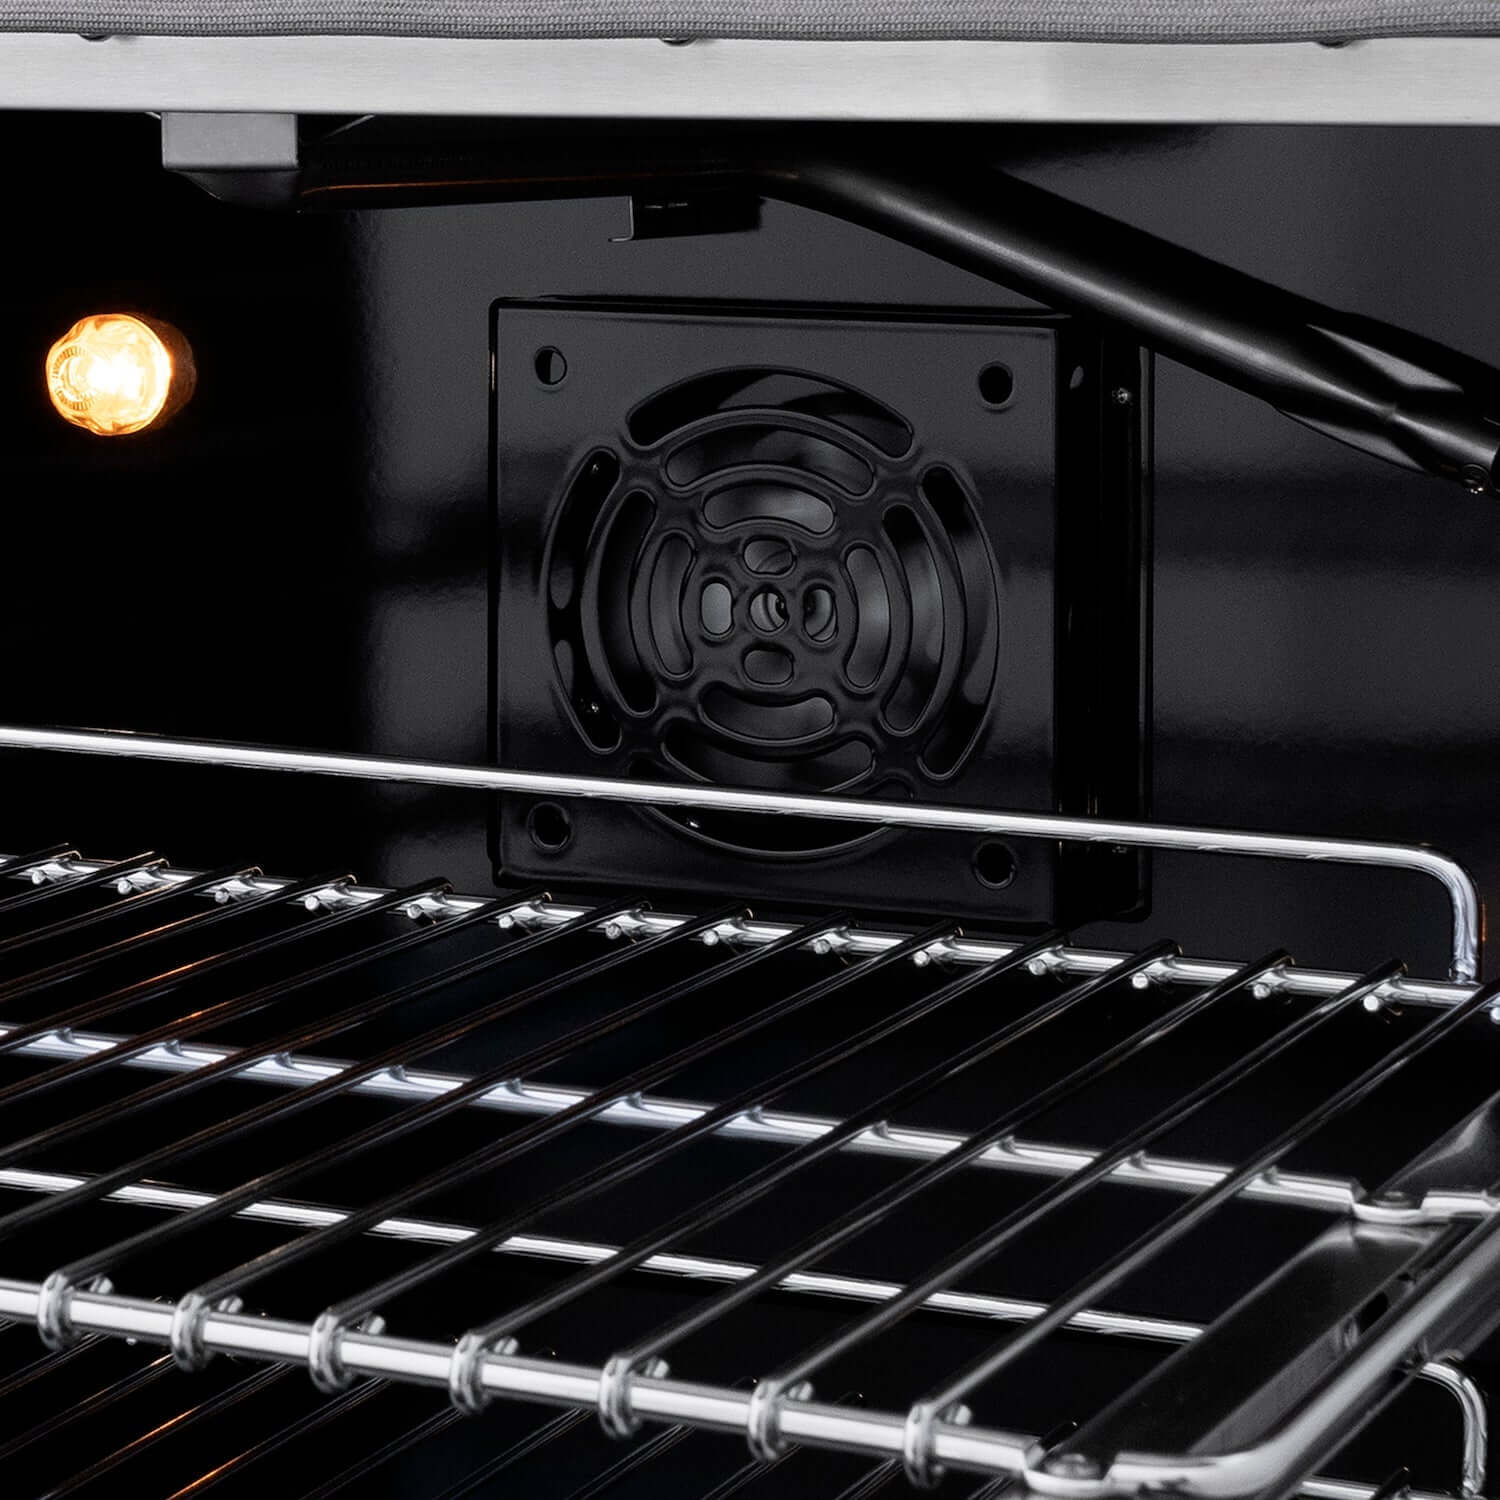 ZLINE 36-inch stainless steel gas range convection fan and halogen light inside oven.